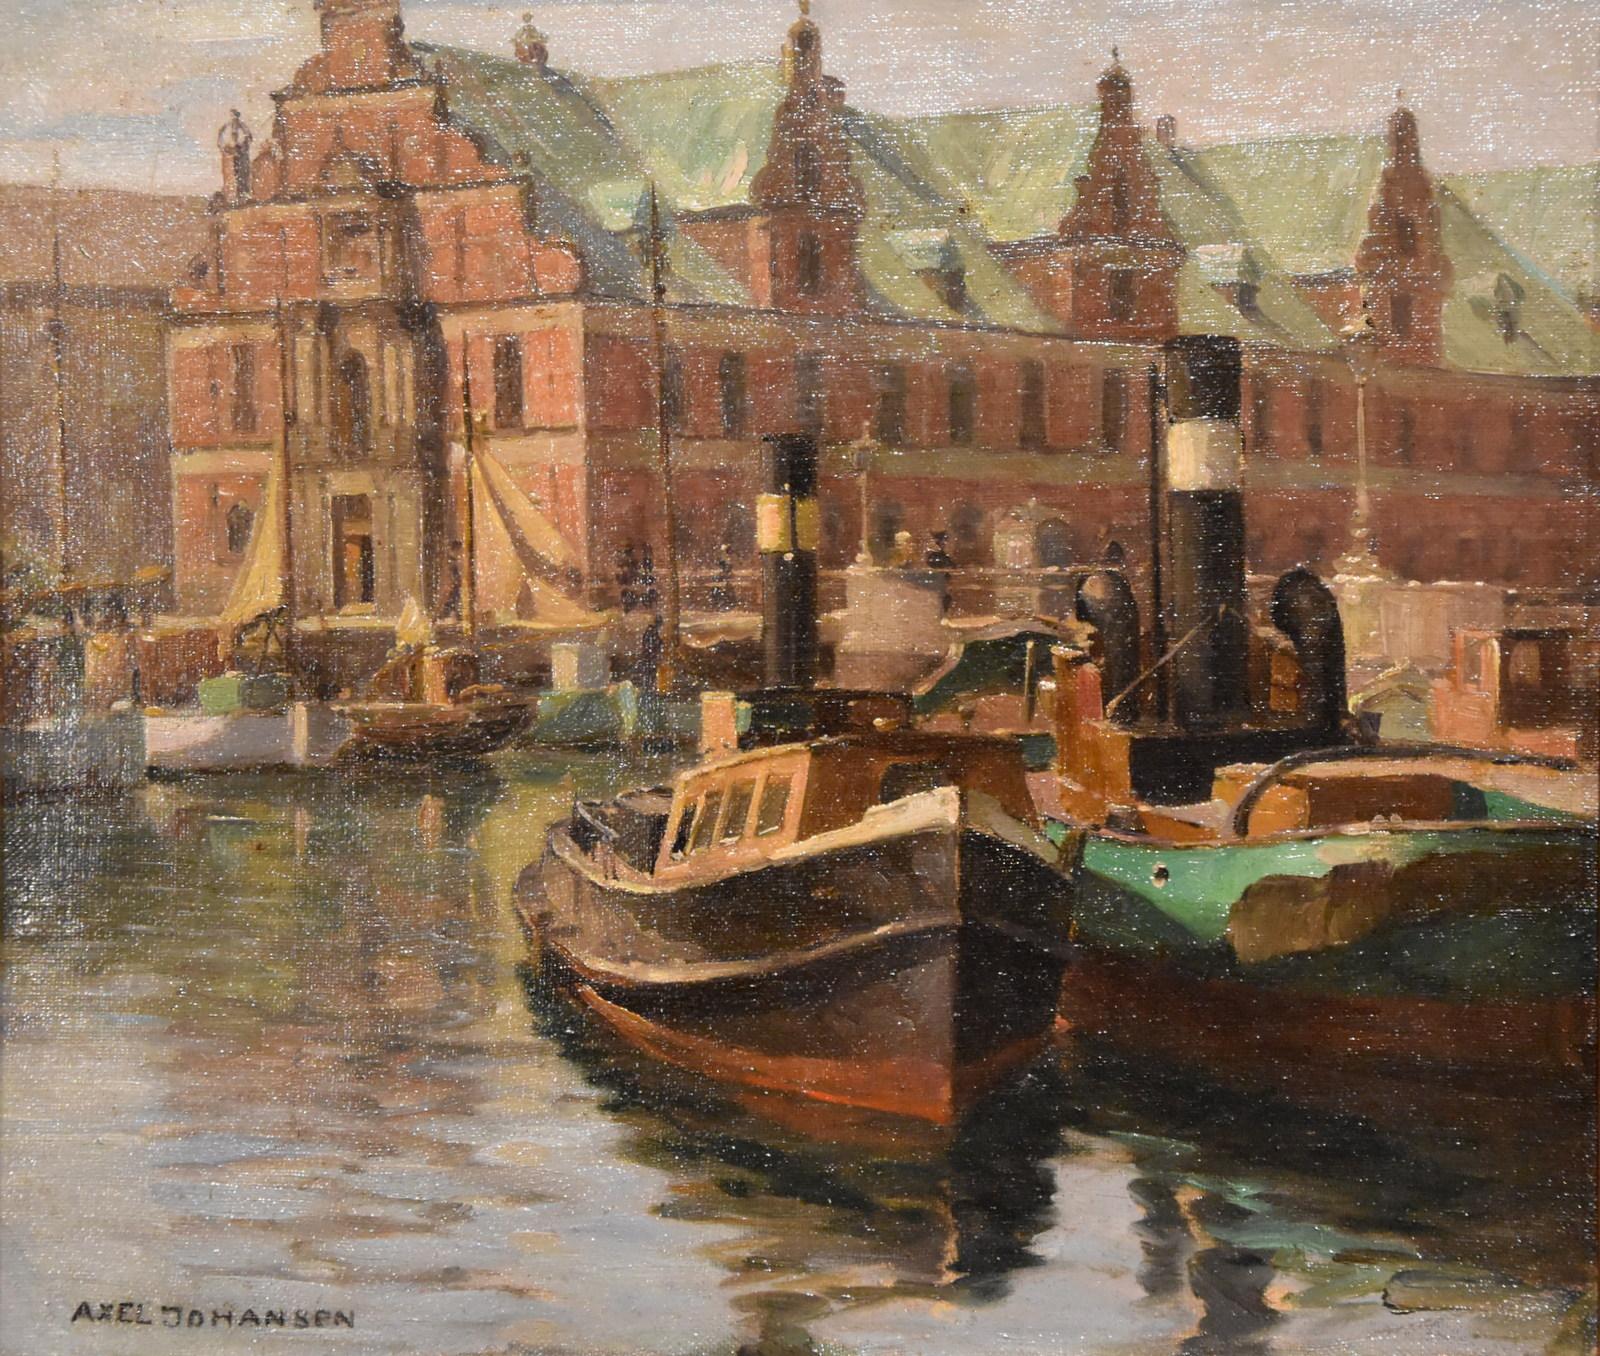 Oil Painting by Axel Johansen "A Busy Harbour"  1872 - 1938. Axel was a Danish painter of Harbour views and Landscapes. Oil on Canvas. Signed and Dated 1924 original Frame

Dimensions unframed 14 x 15.5

Dimensions framed 19 x 21

All of the items